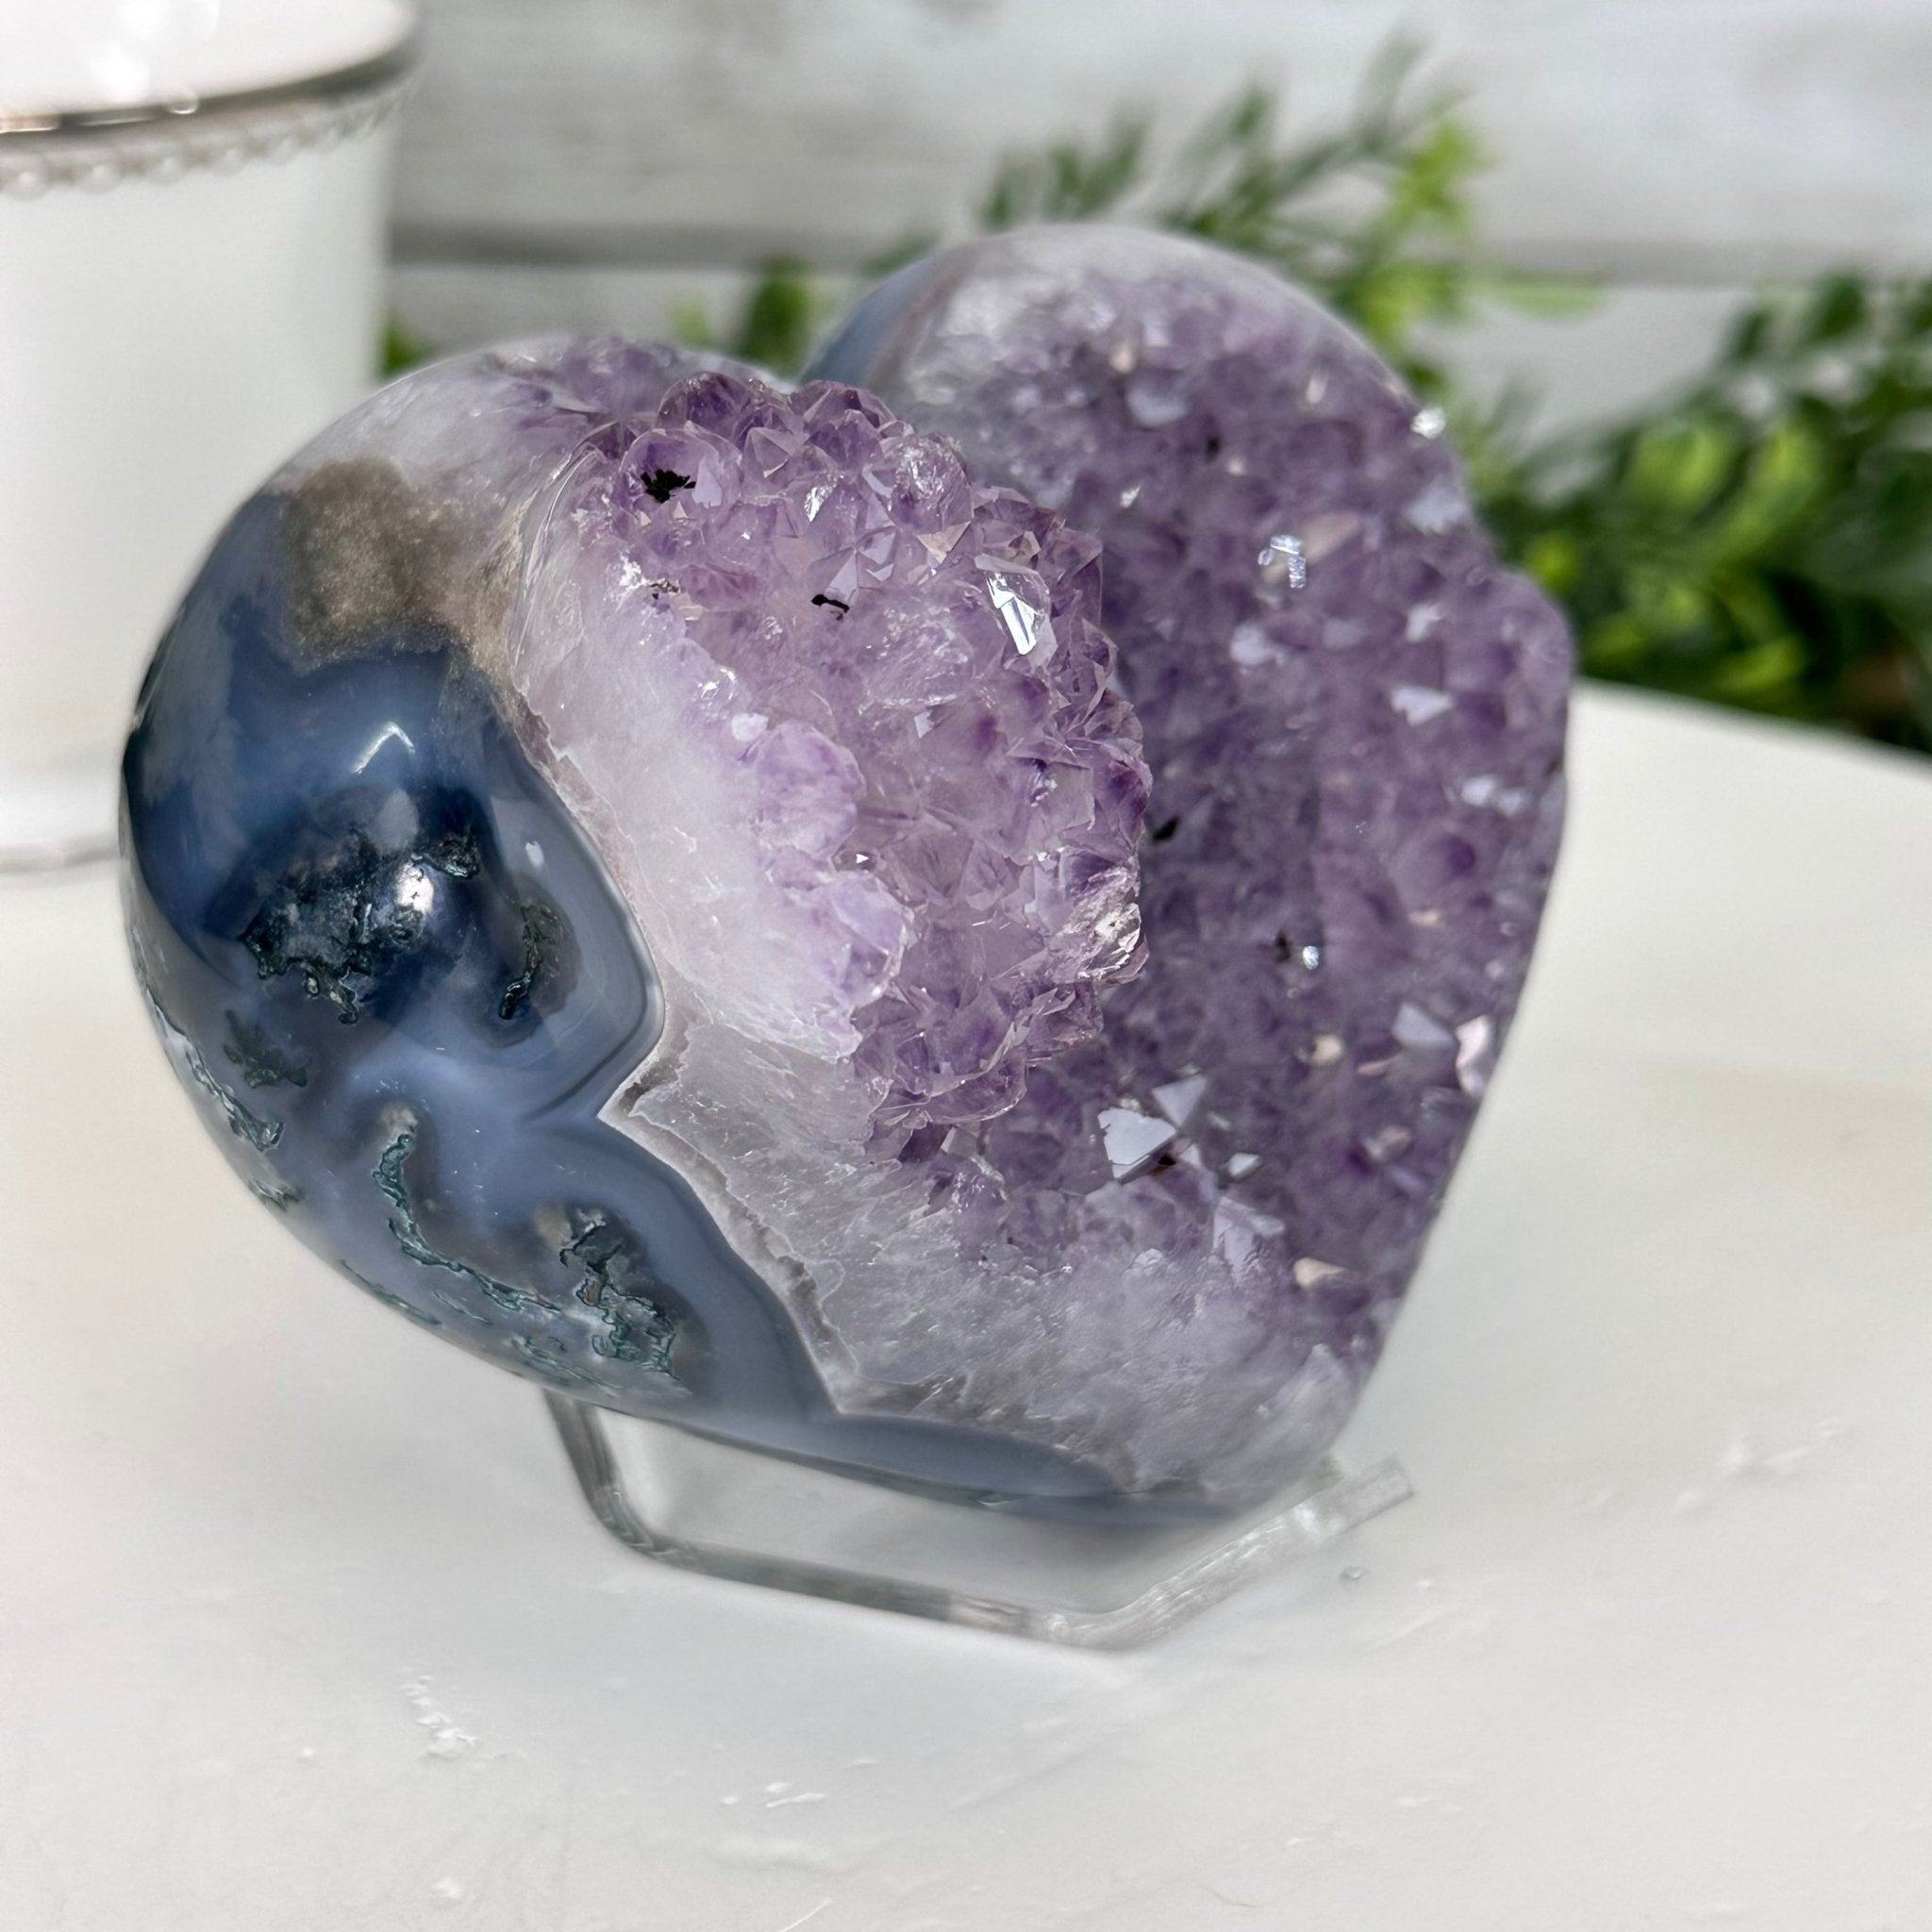 Extra Quality Amethyst Heart Geode on an Acrylic Stand 1.65 lbs & 3.25" Tall #5462-0098 by Brazil Gems - Brazil GemsBrazil GemsExtra Quality Amethyst Heart Geode on an Acrylic Stand 1.65 lbs & 3.25" Tall #5462-0098 by Brazil GemsHearts5462-0098